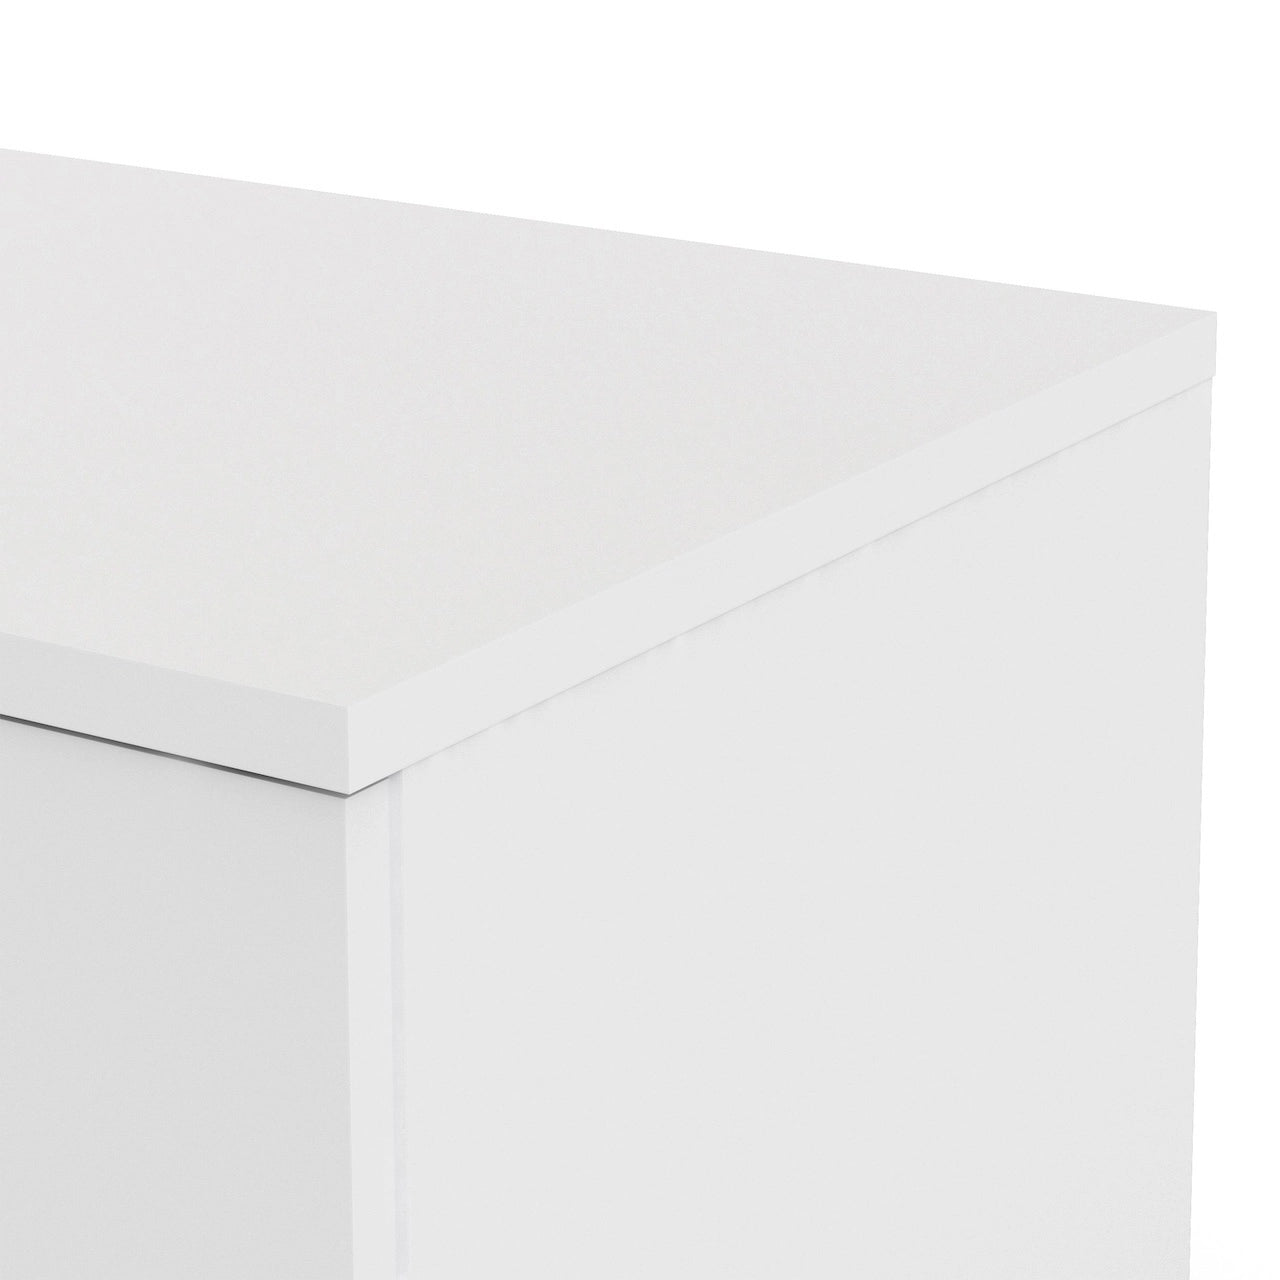 Furniture To Go Match TV Unit 1 Drawers 2 Shelf in White High Gloss